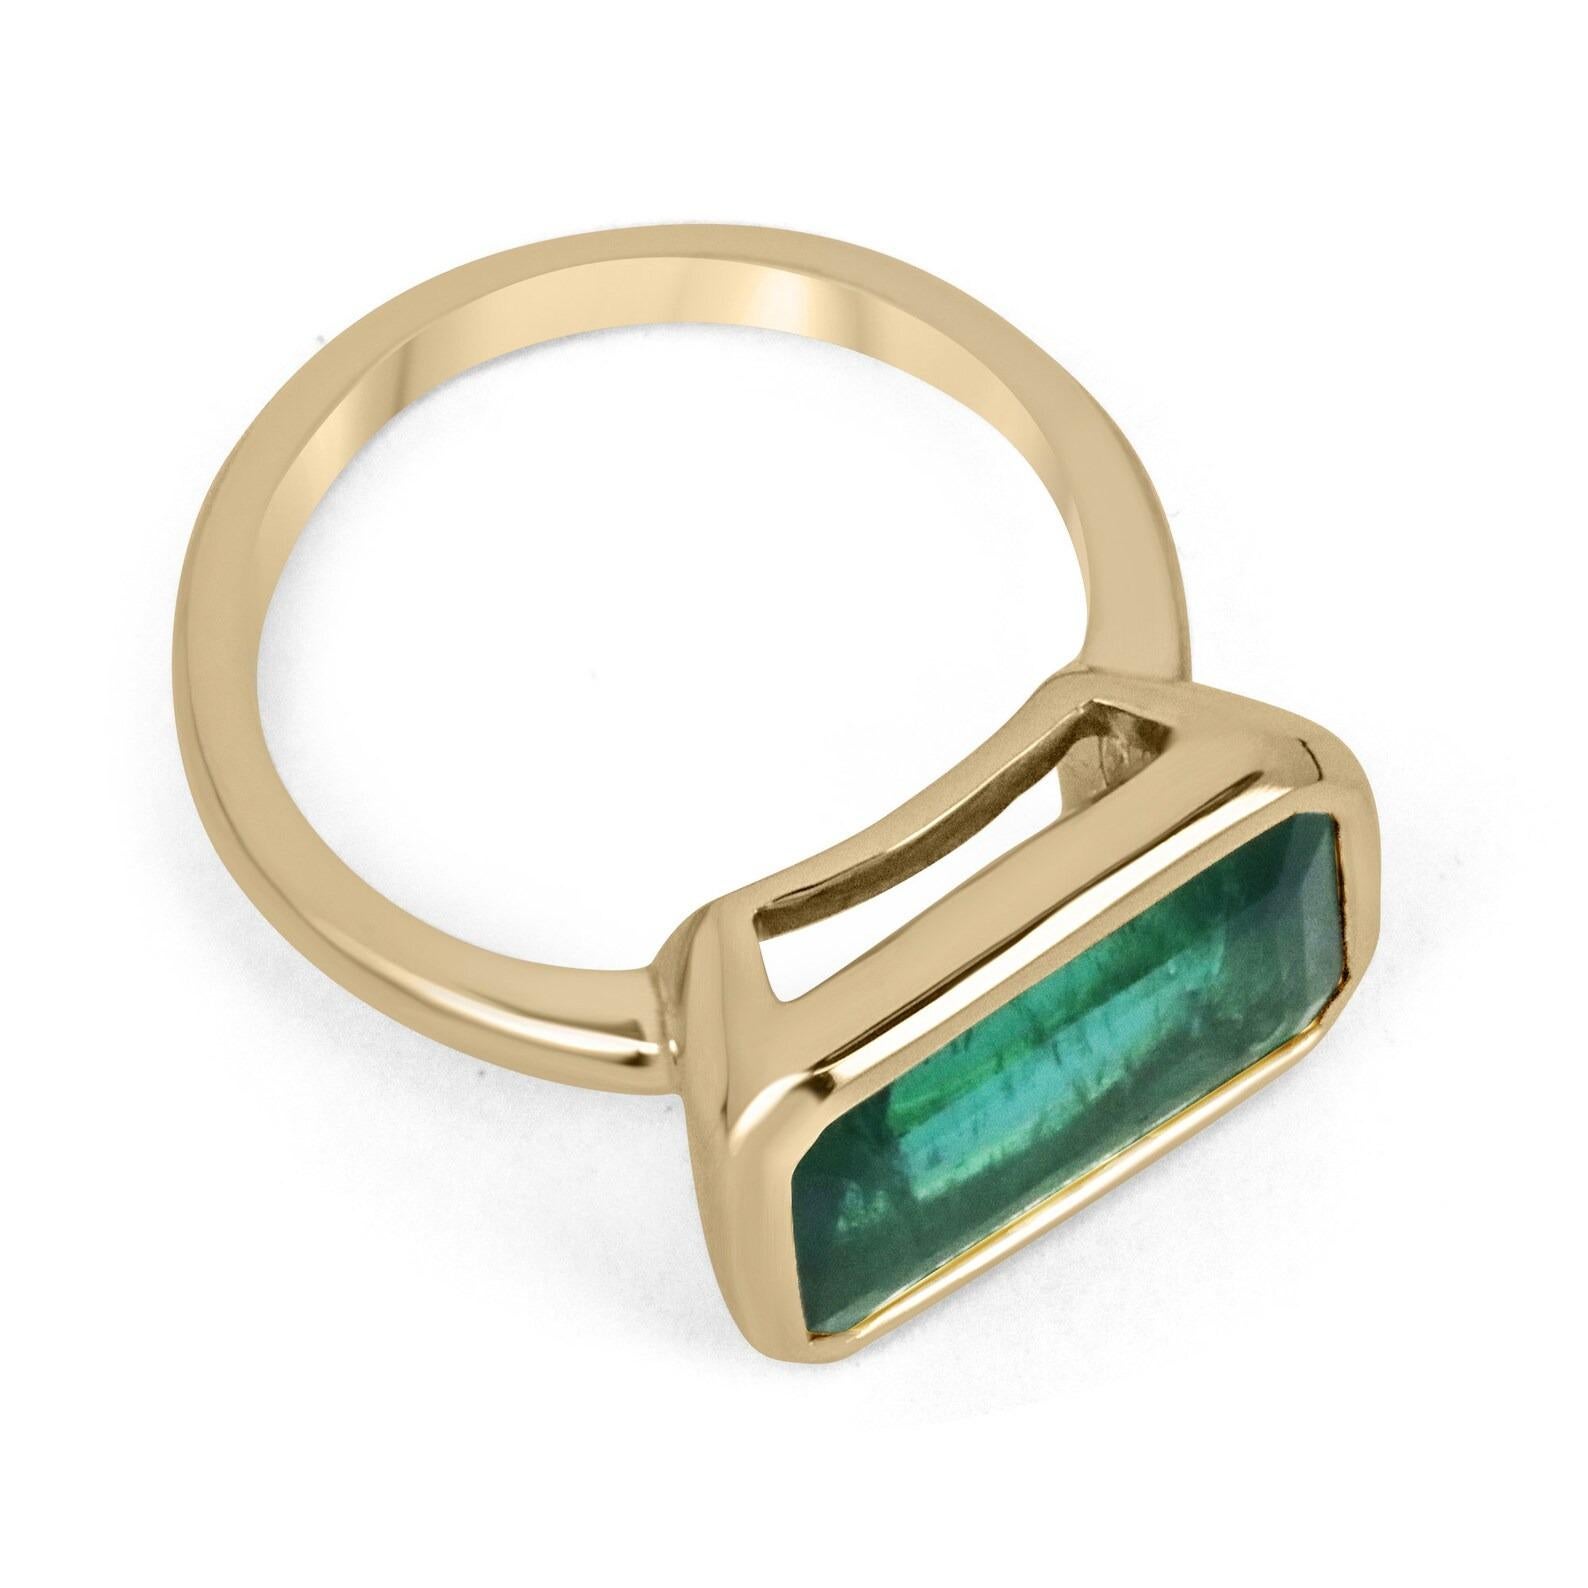 Displayed is a stunning East-to-West high-quality rare emerald solitaire engagement or right-hand ring in solid 18K yellow gold. This gorgeous solitaire ring carries a 5.48-carat emerald in a bezel setting. Fully faceted, this gemstone showcases